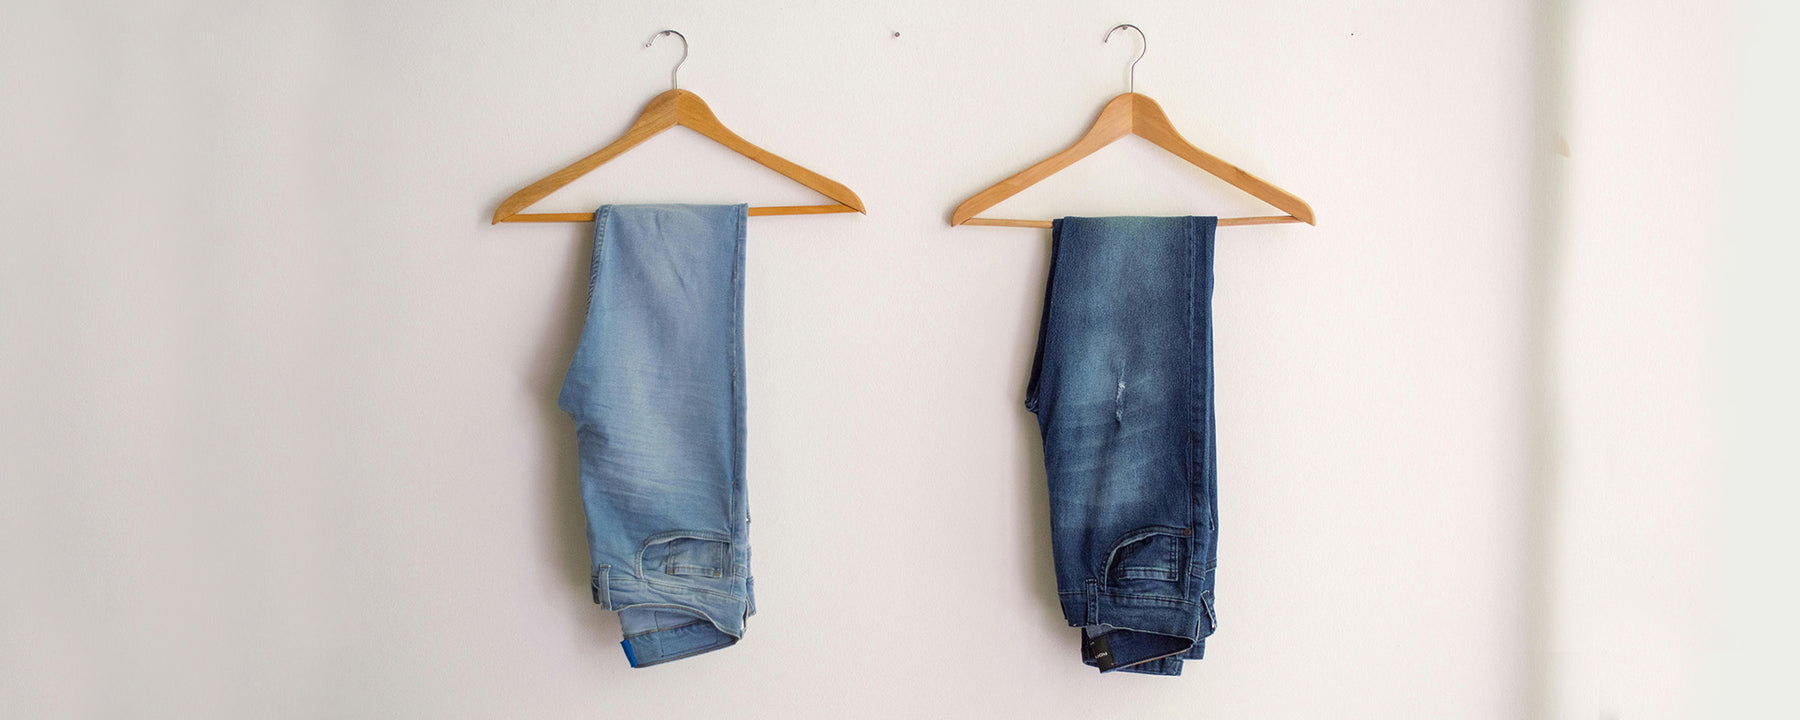 The Well Worn denim jeans on coat hangers on the wall